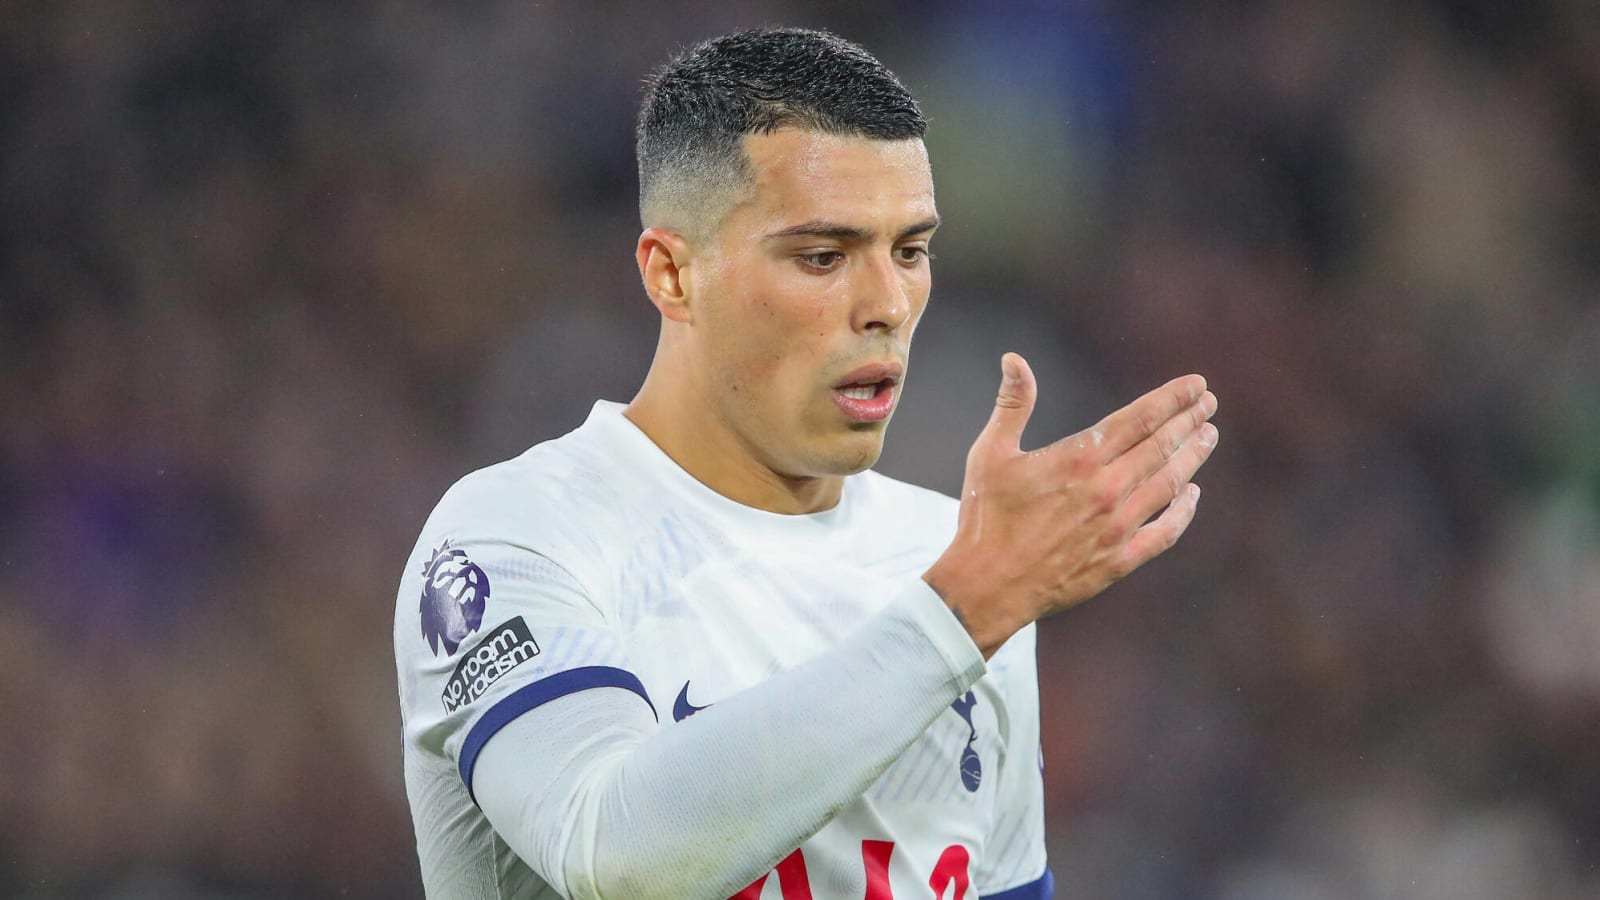 'There are some doubts' – Reporter shares latest on Tottenham player’s fitness ahead of Arsenal game